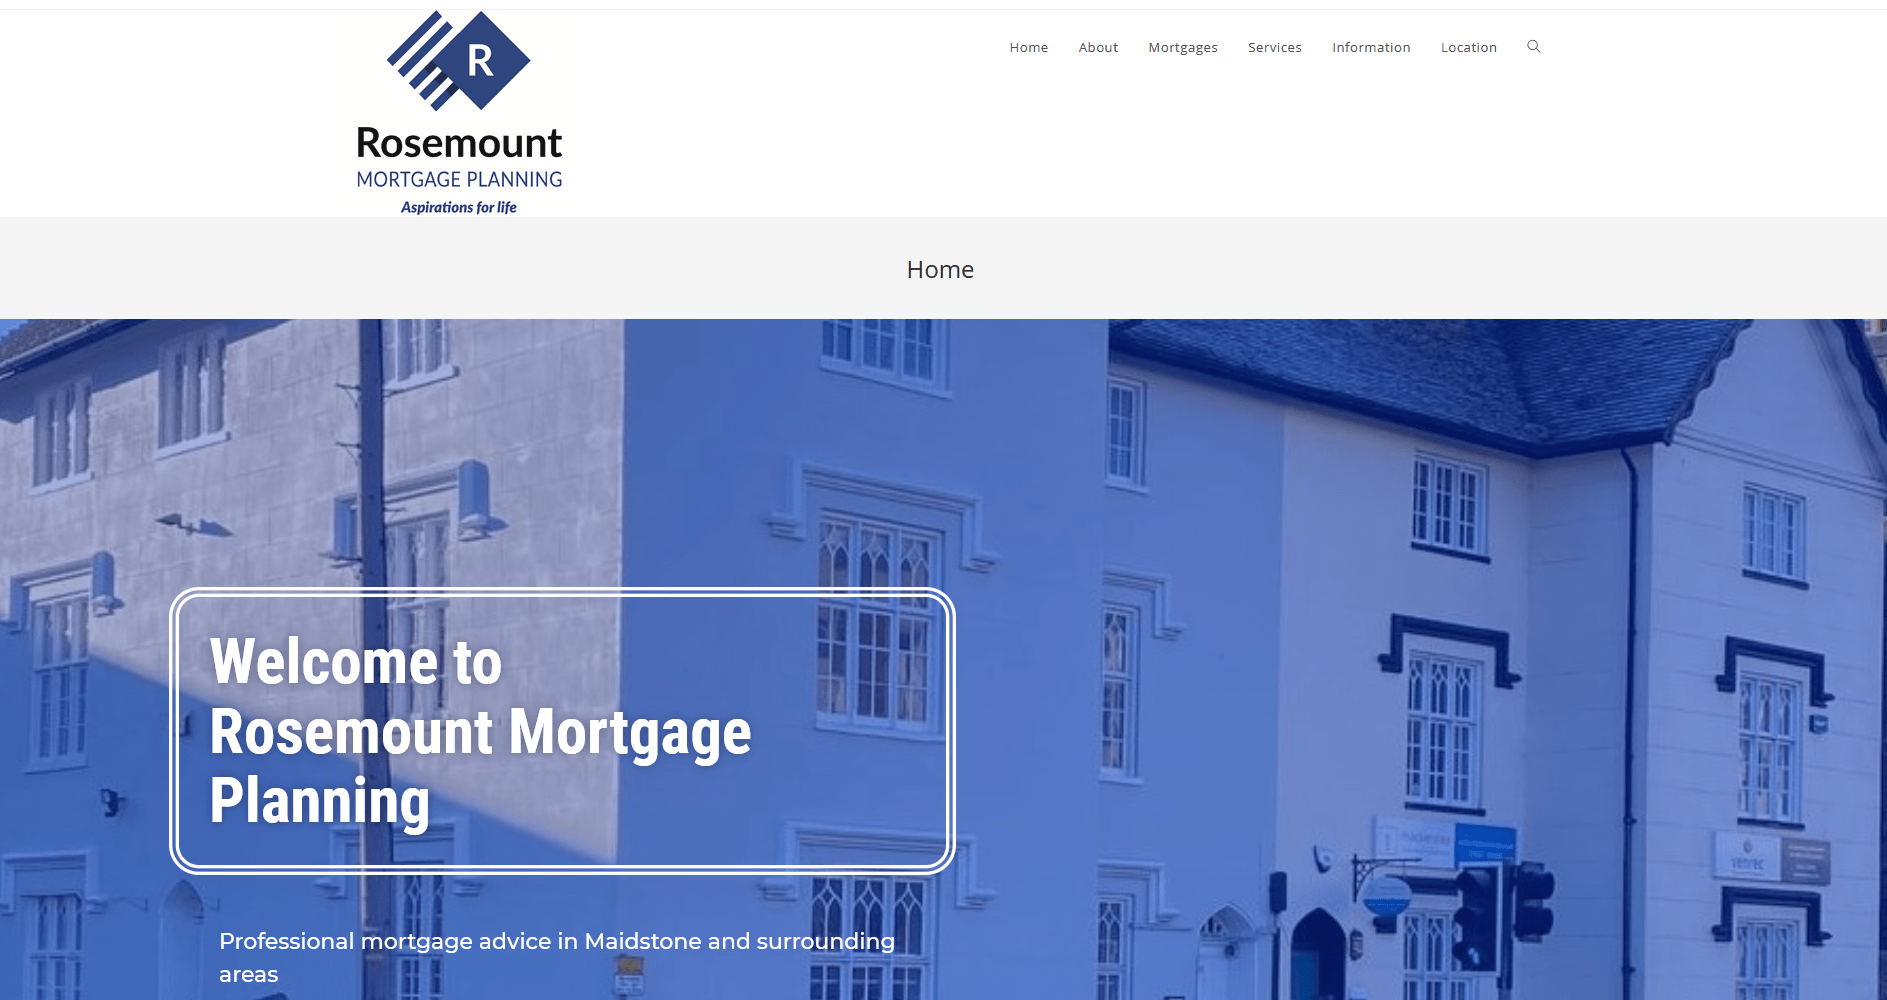 Rosemount Mortgage Planning home page